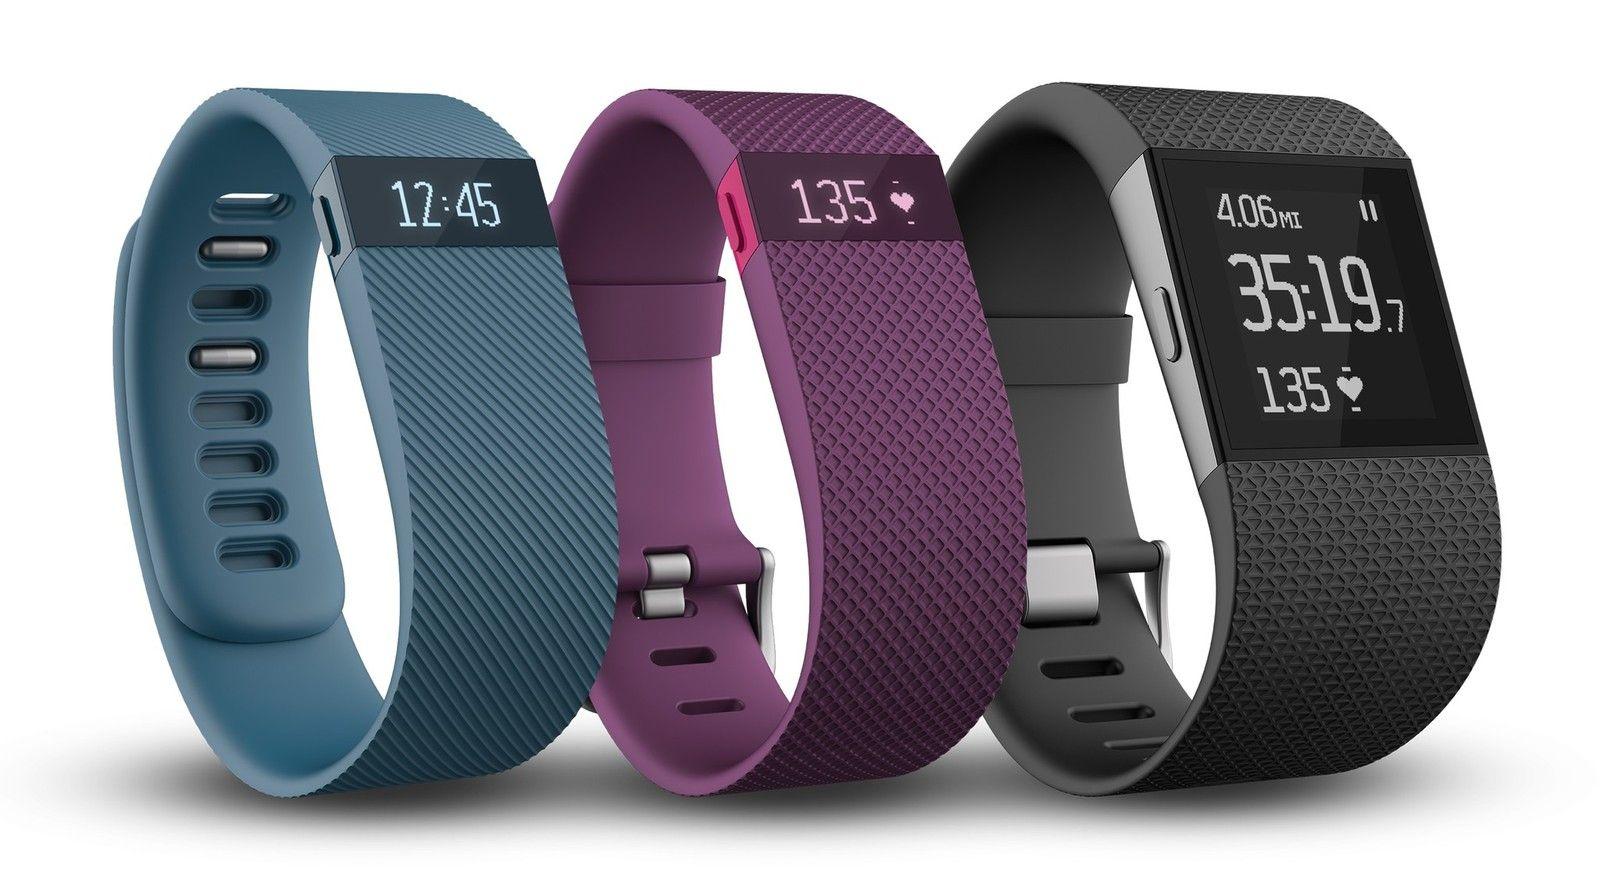 How to restart your Fitbit fitness tracker